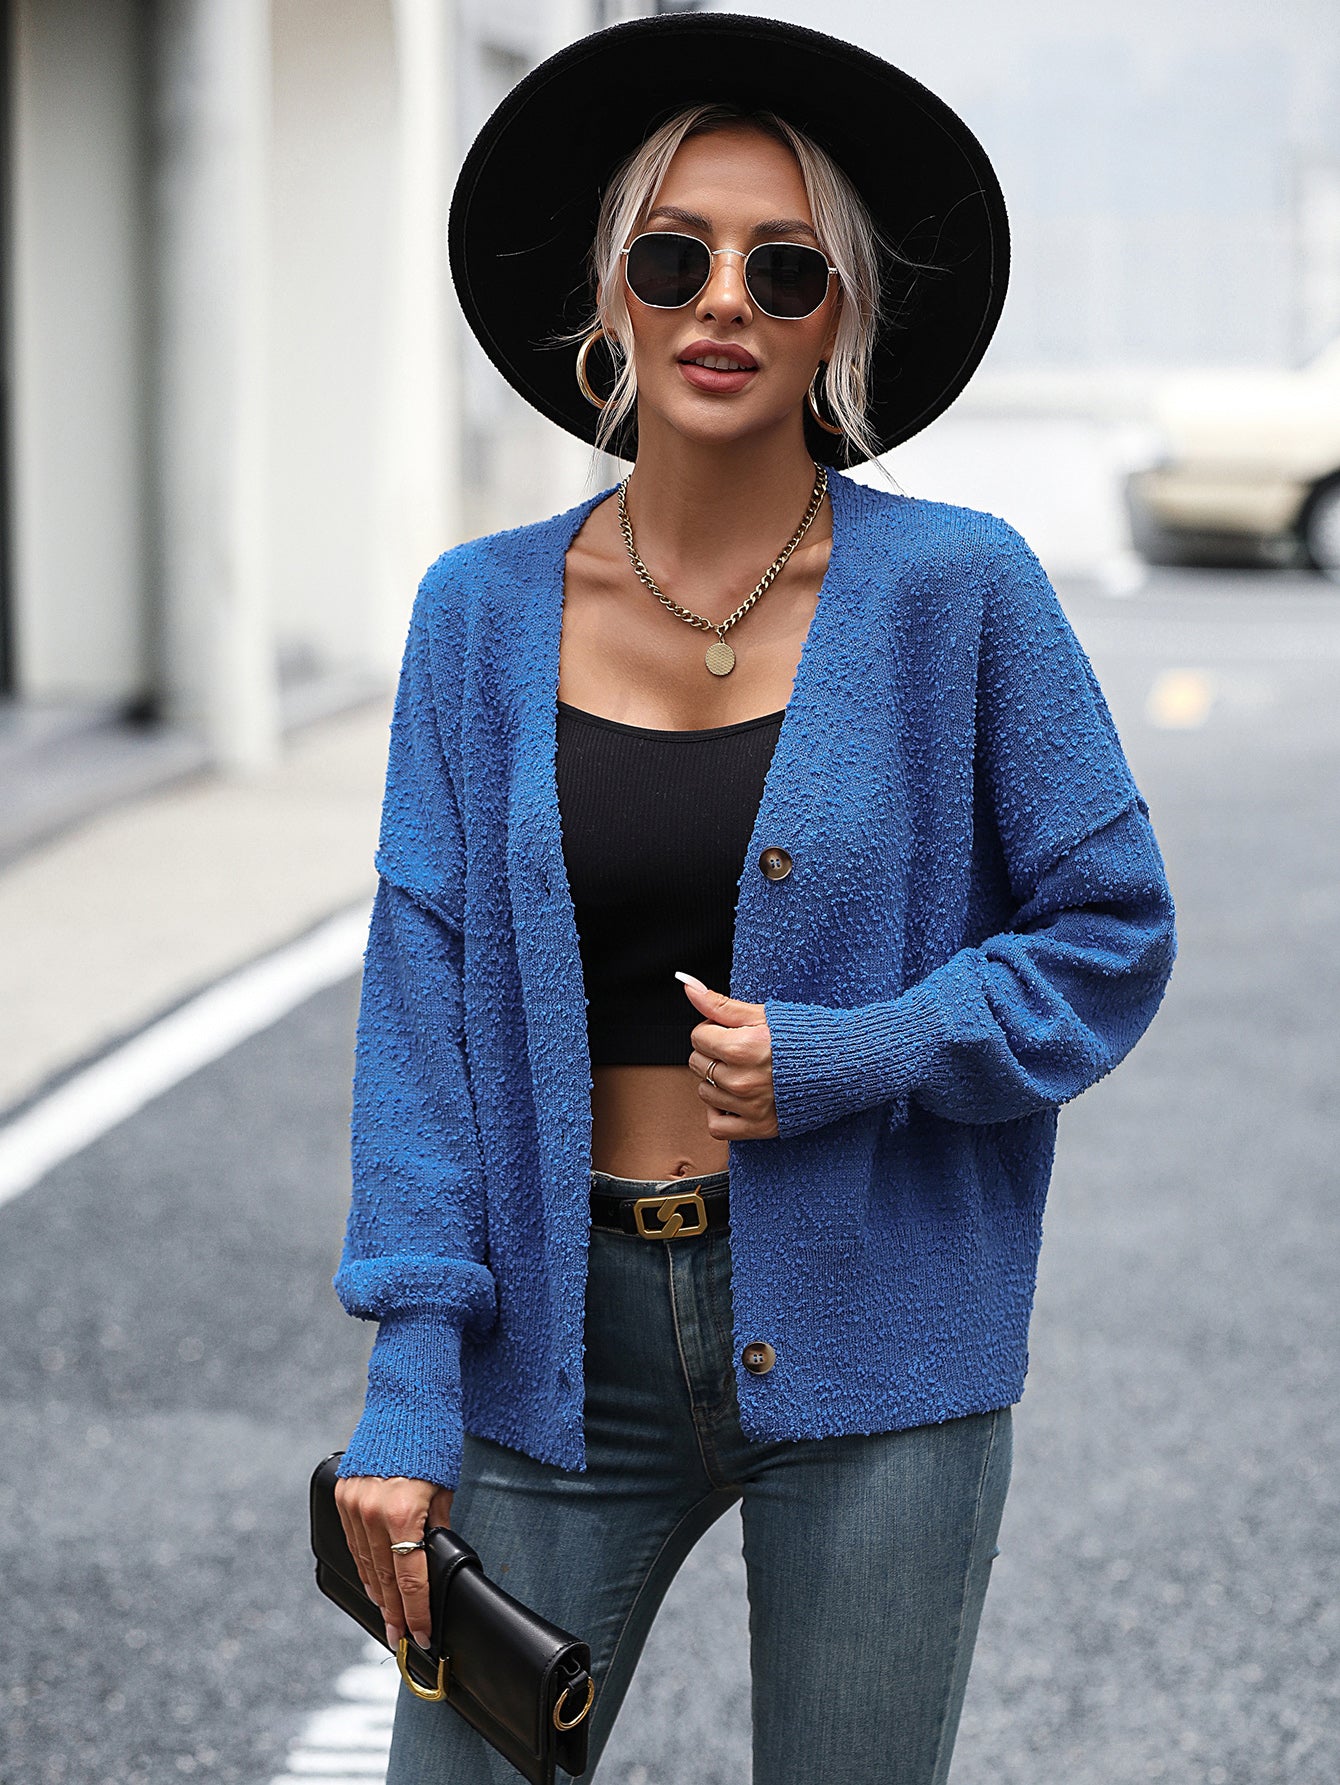 Autumn Winter Women Clothing V Neck Buttons Solid Color Knitted Cardigan Women Coat Sweater Women